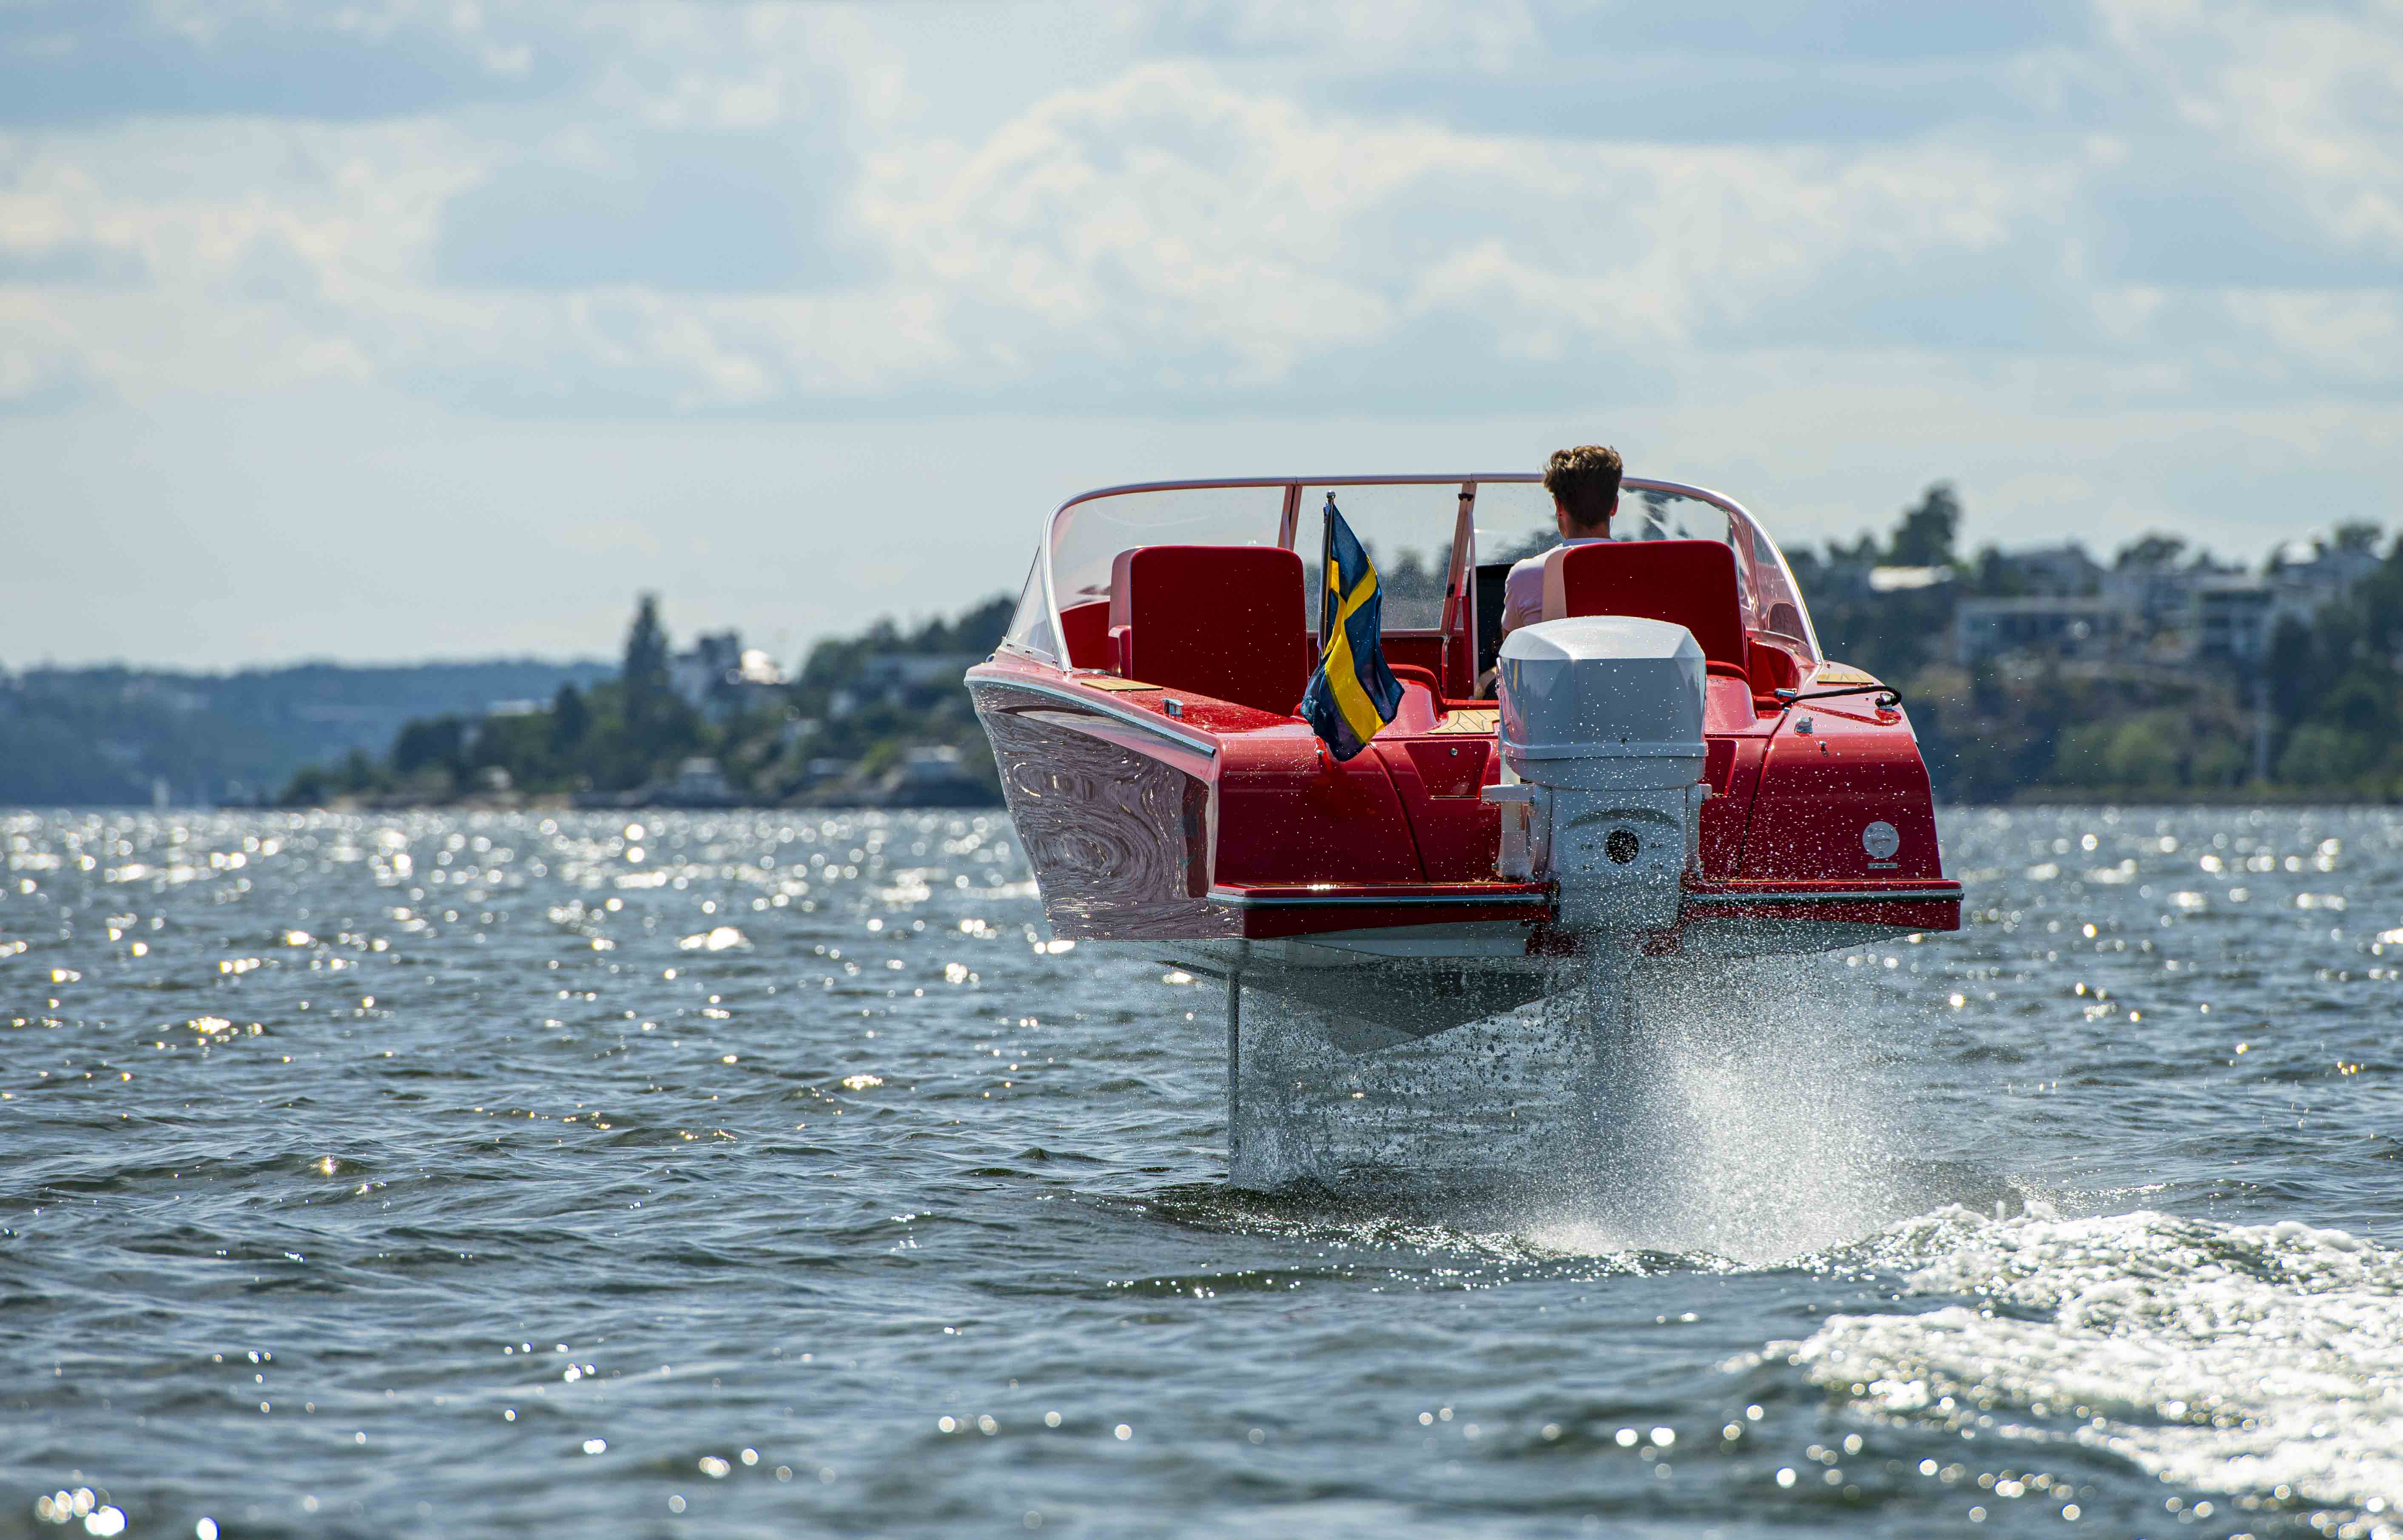 A red Candela Speed Boat driving away from camera